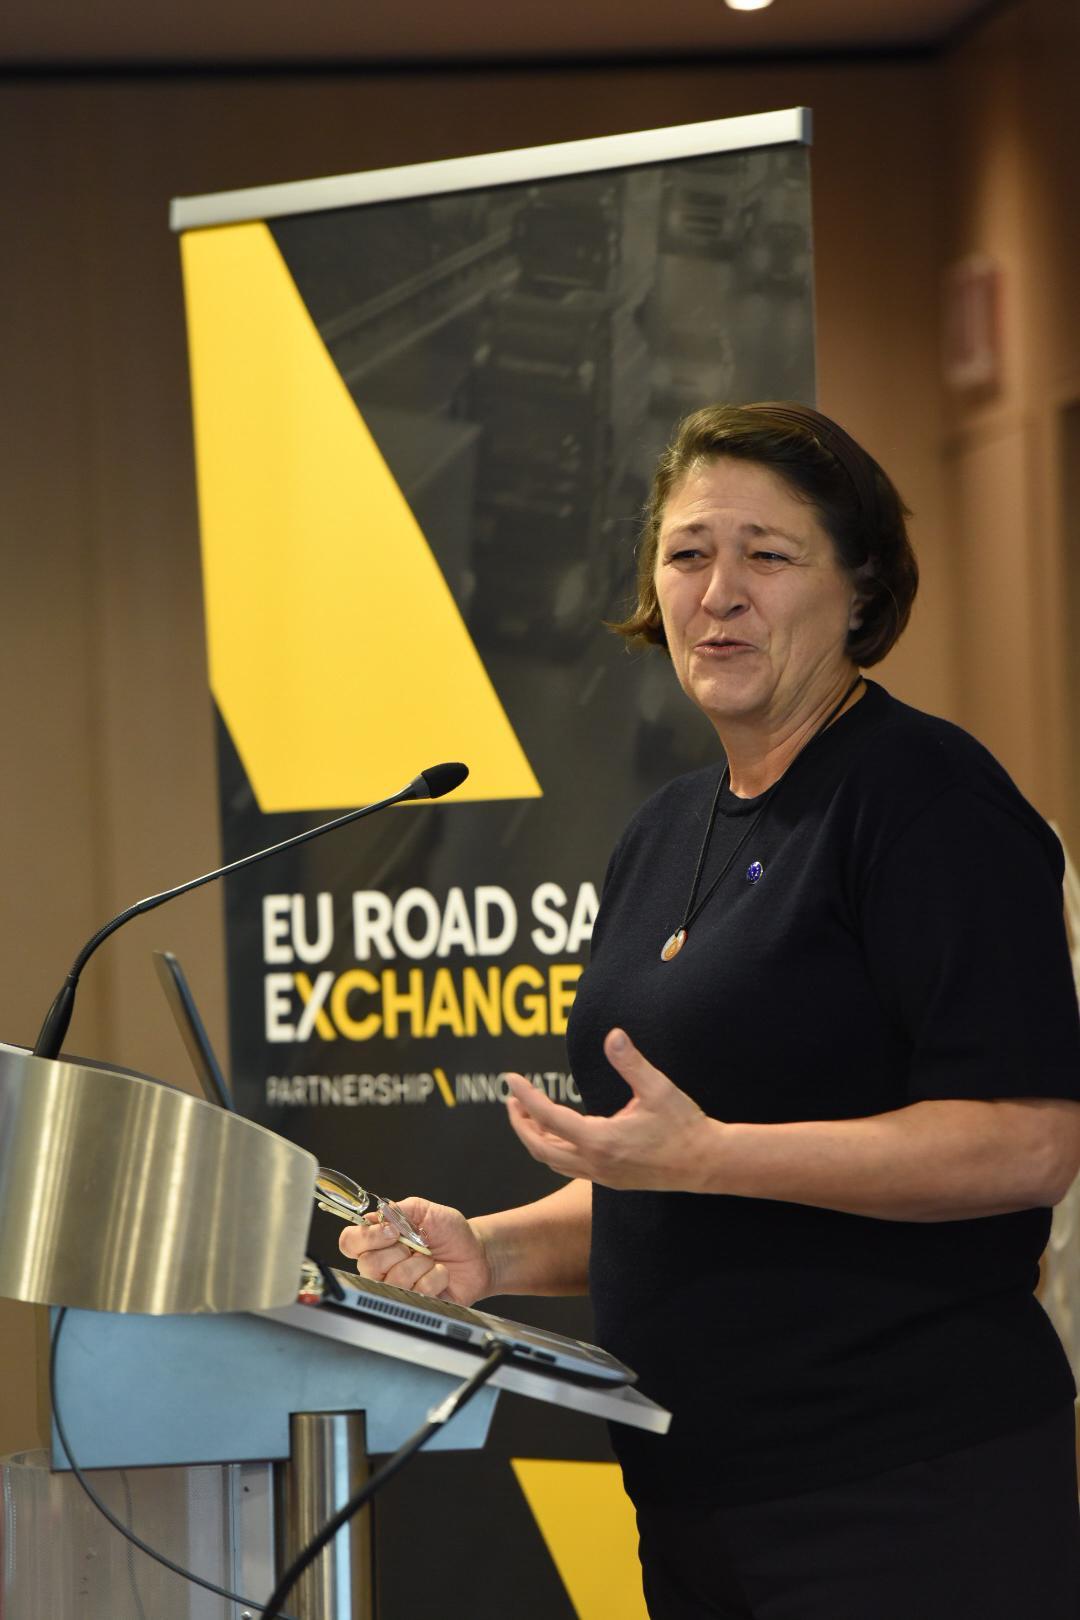 ETSC Road Safety Exchange 9.10.2019 Brussels